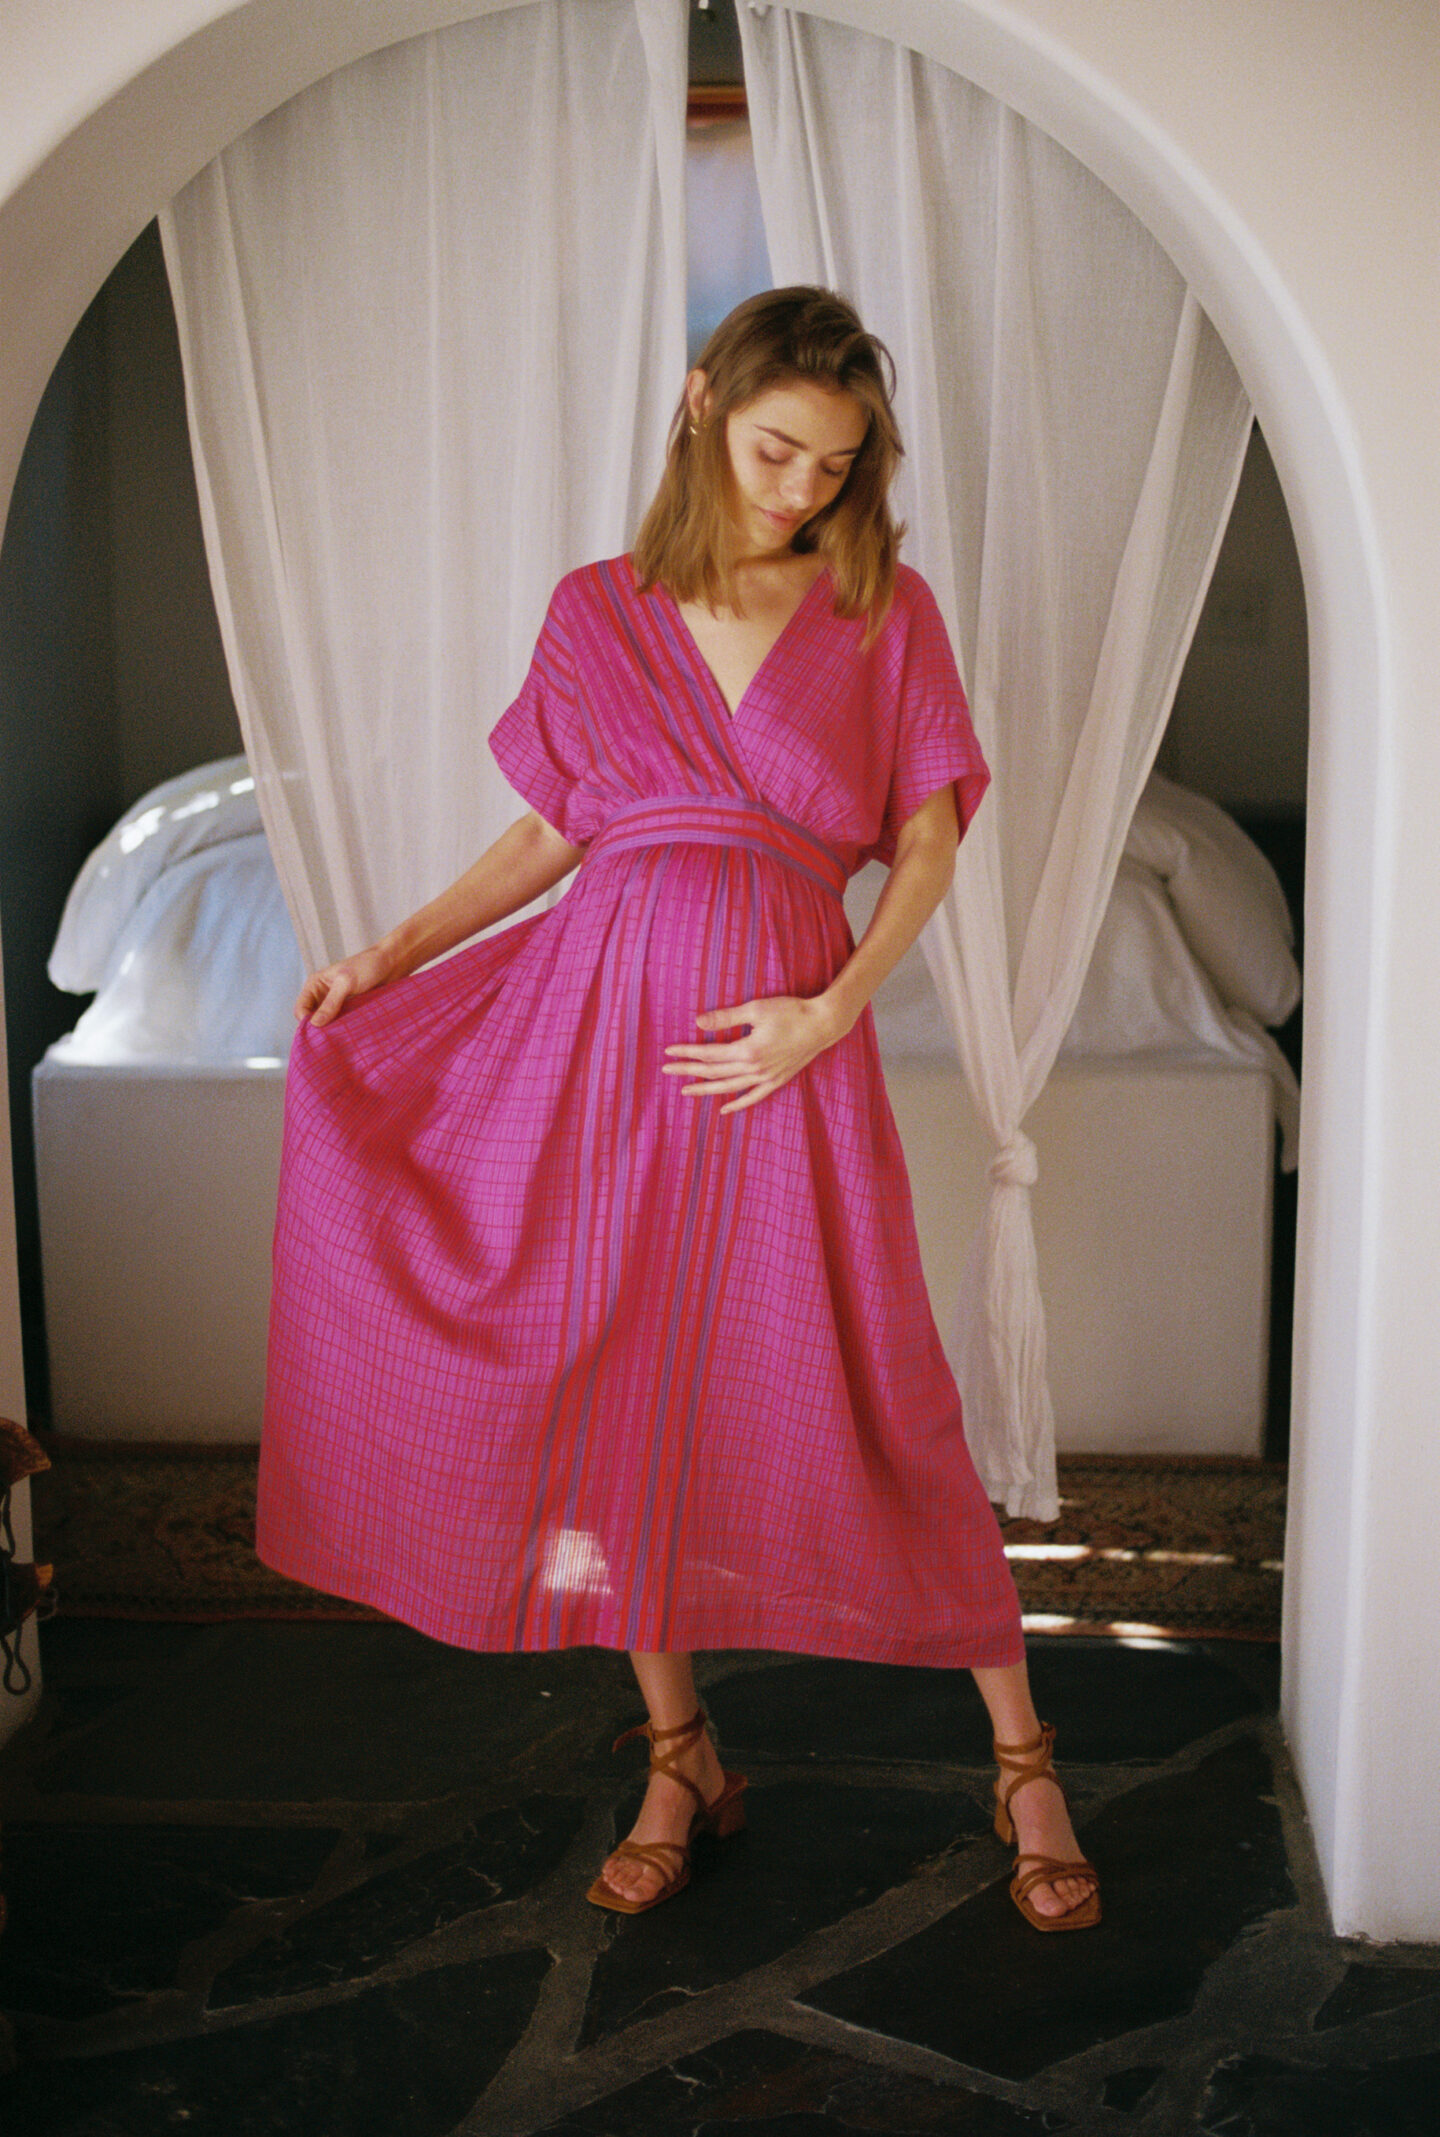 pregnant woman in a pink dress